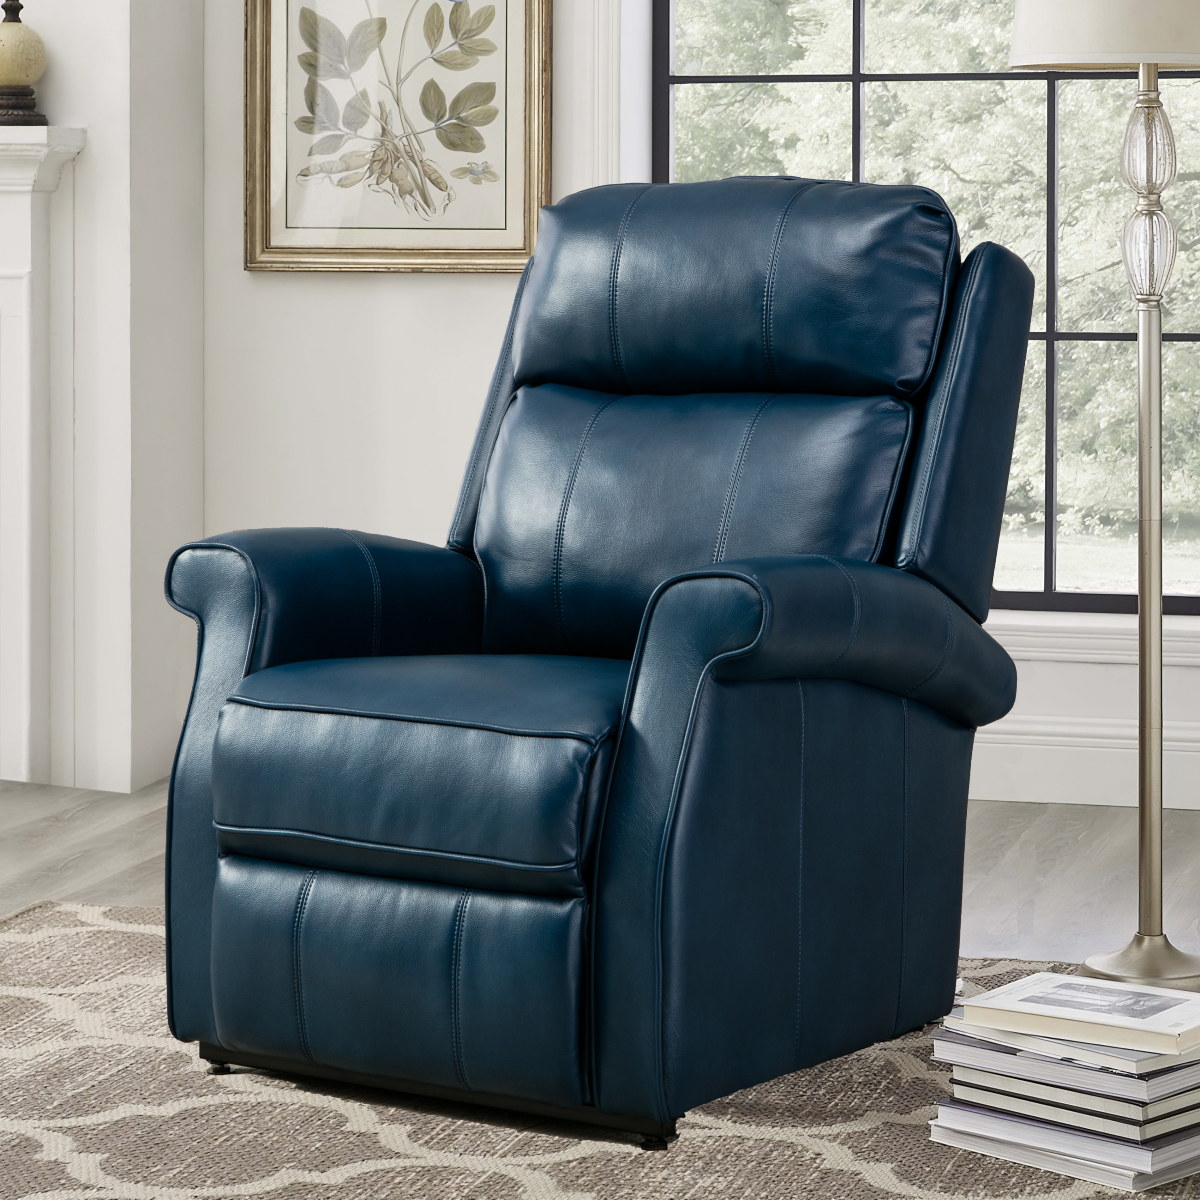 Landis Navy Blue Lift Chair Recliner, front angle